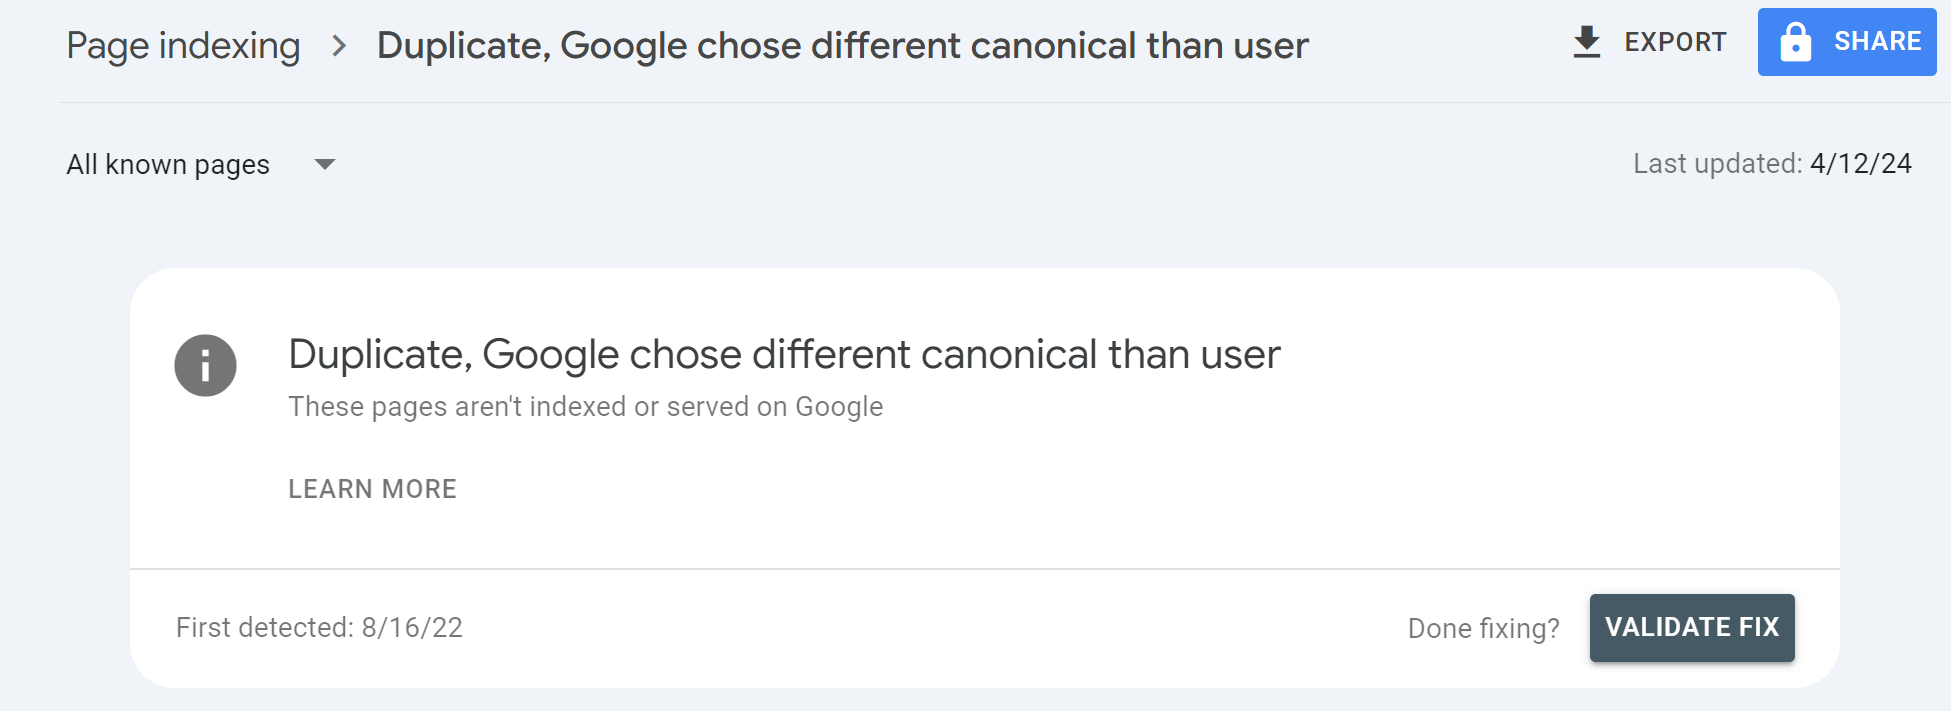 duplicate-google-chose-a-different-canonical-than